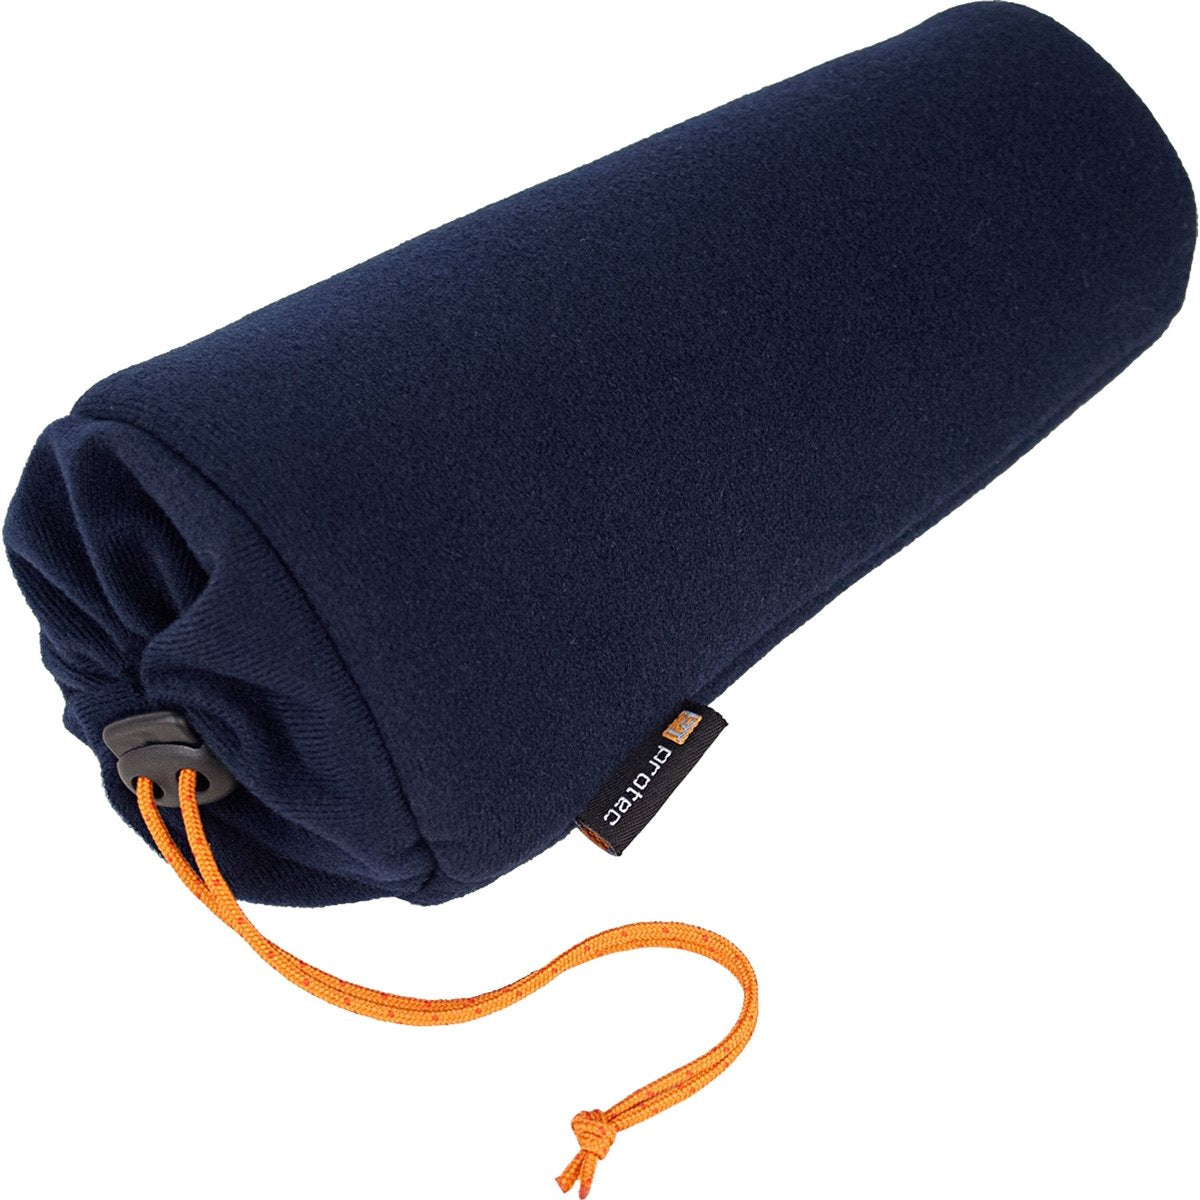 Protec - In-Bell Storage Pouch (for Baritone Saxophone)-Accessories-Protec-Music Elements